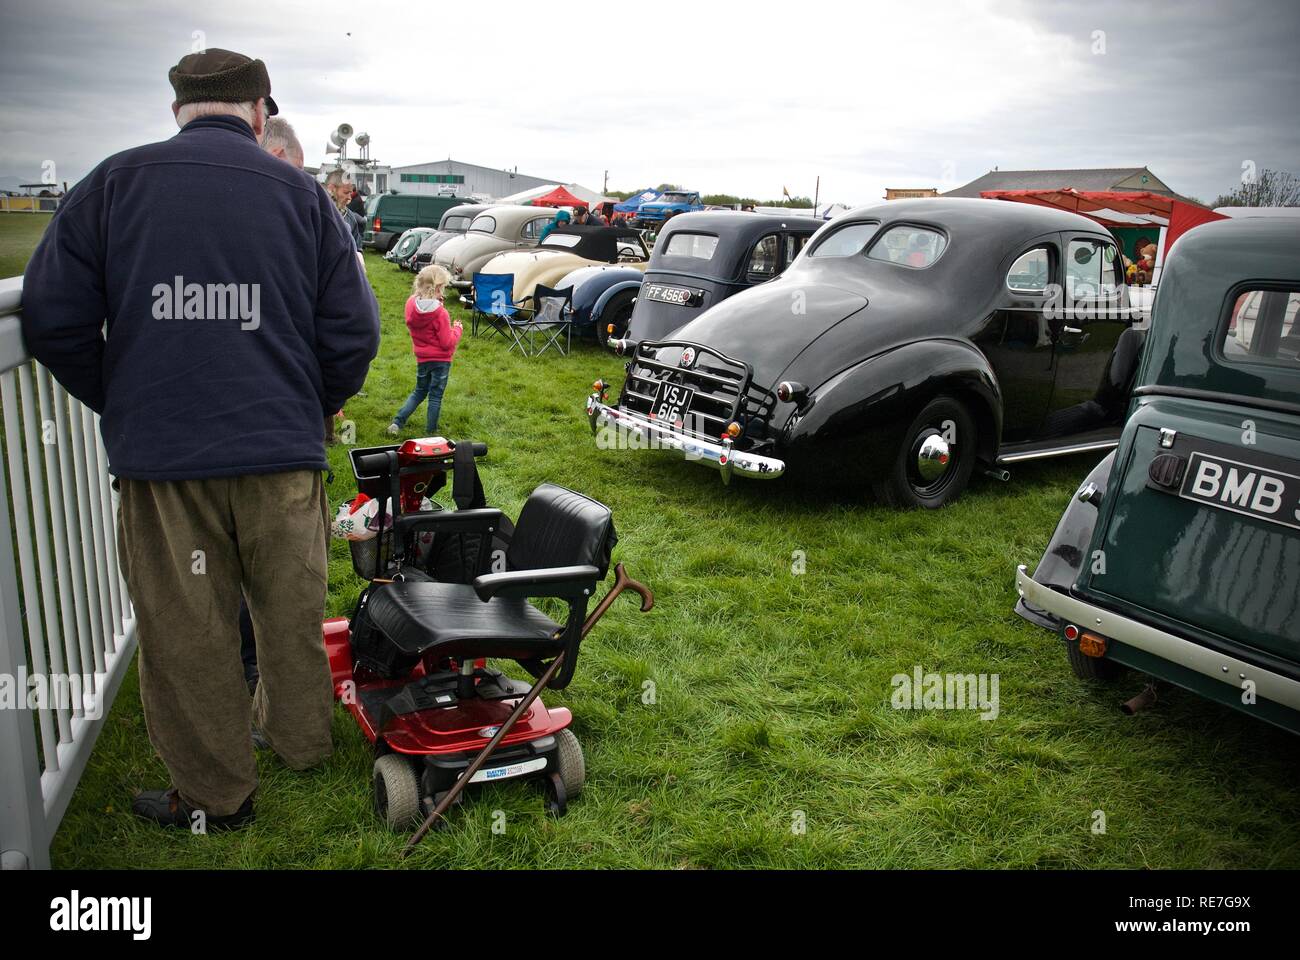 A visitor with a mobility scooter watches American car exhibits at the Anglesey Vintage Rally, Anglesey, North Wales, UK, May 2015 Stock Photo